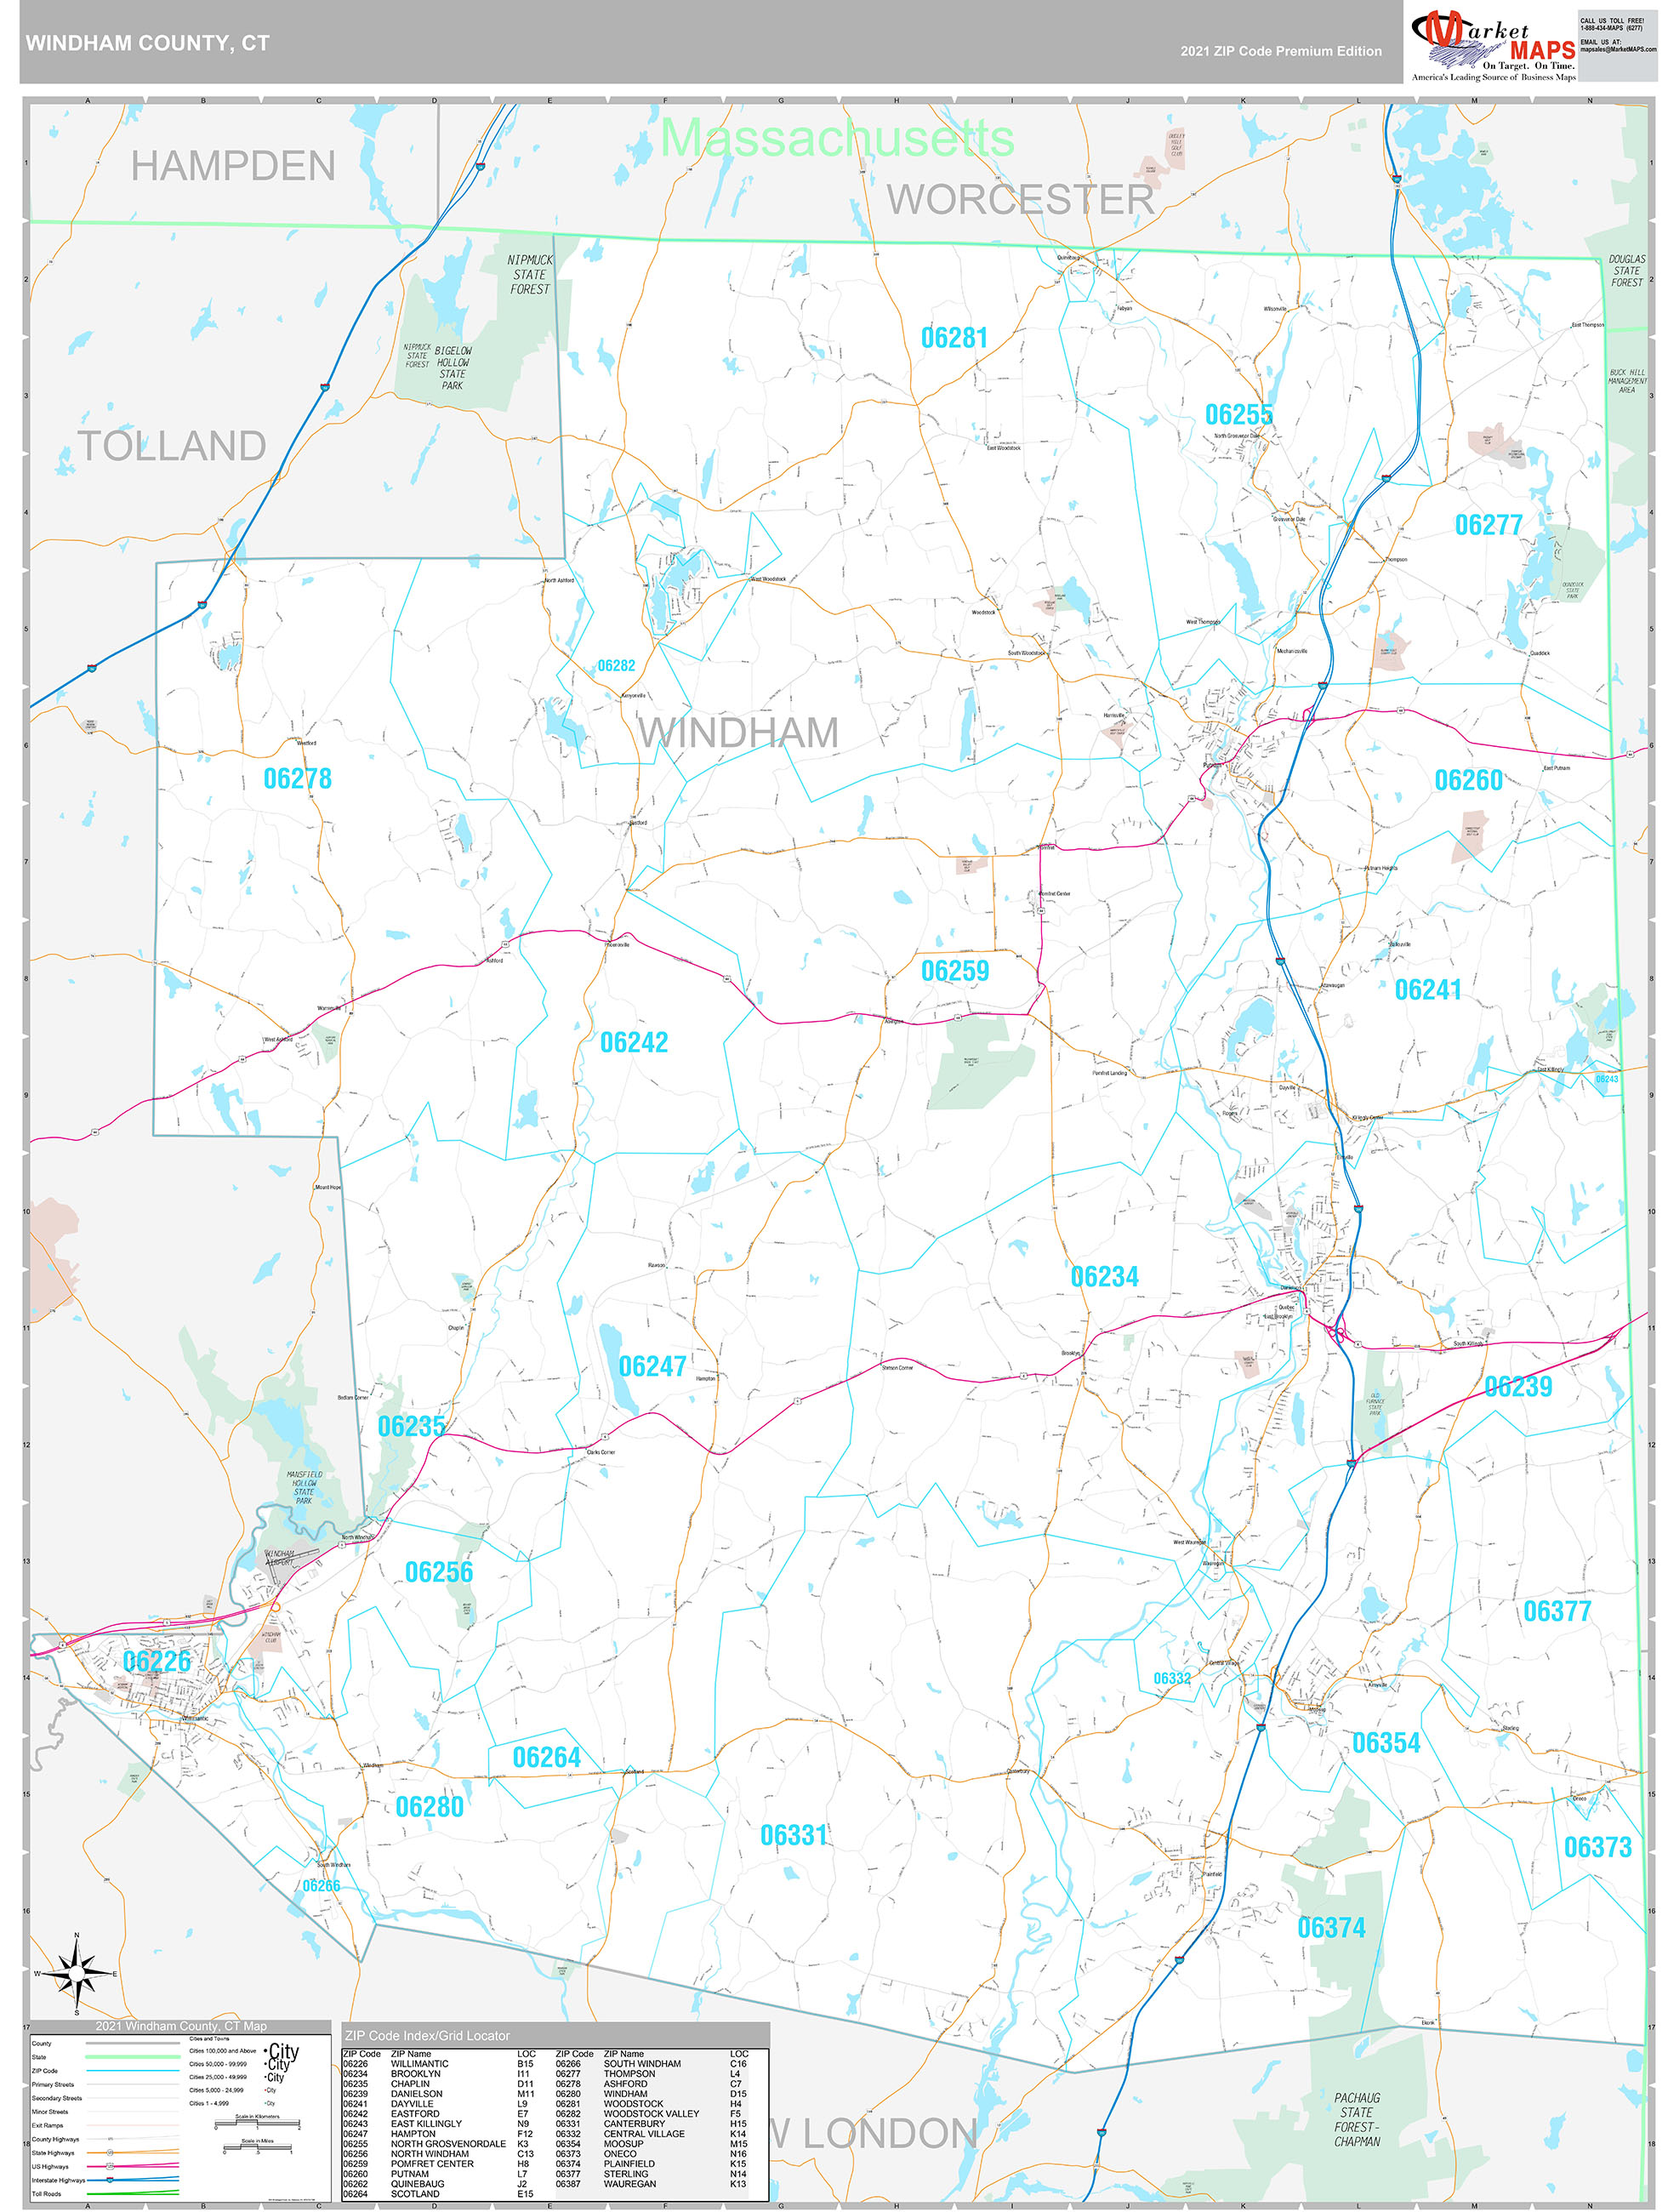 Windham County, CT Wall Map Premium Style by MarketMAPS